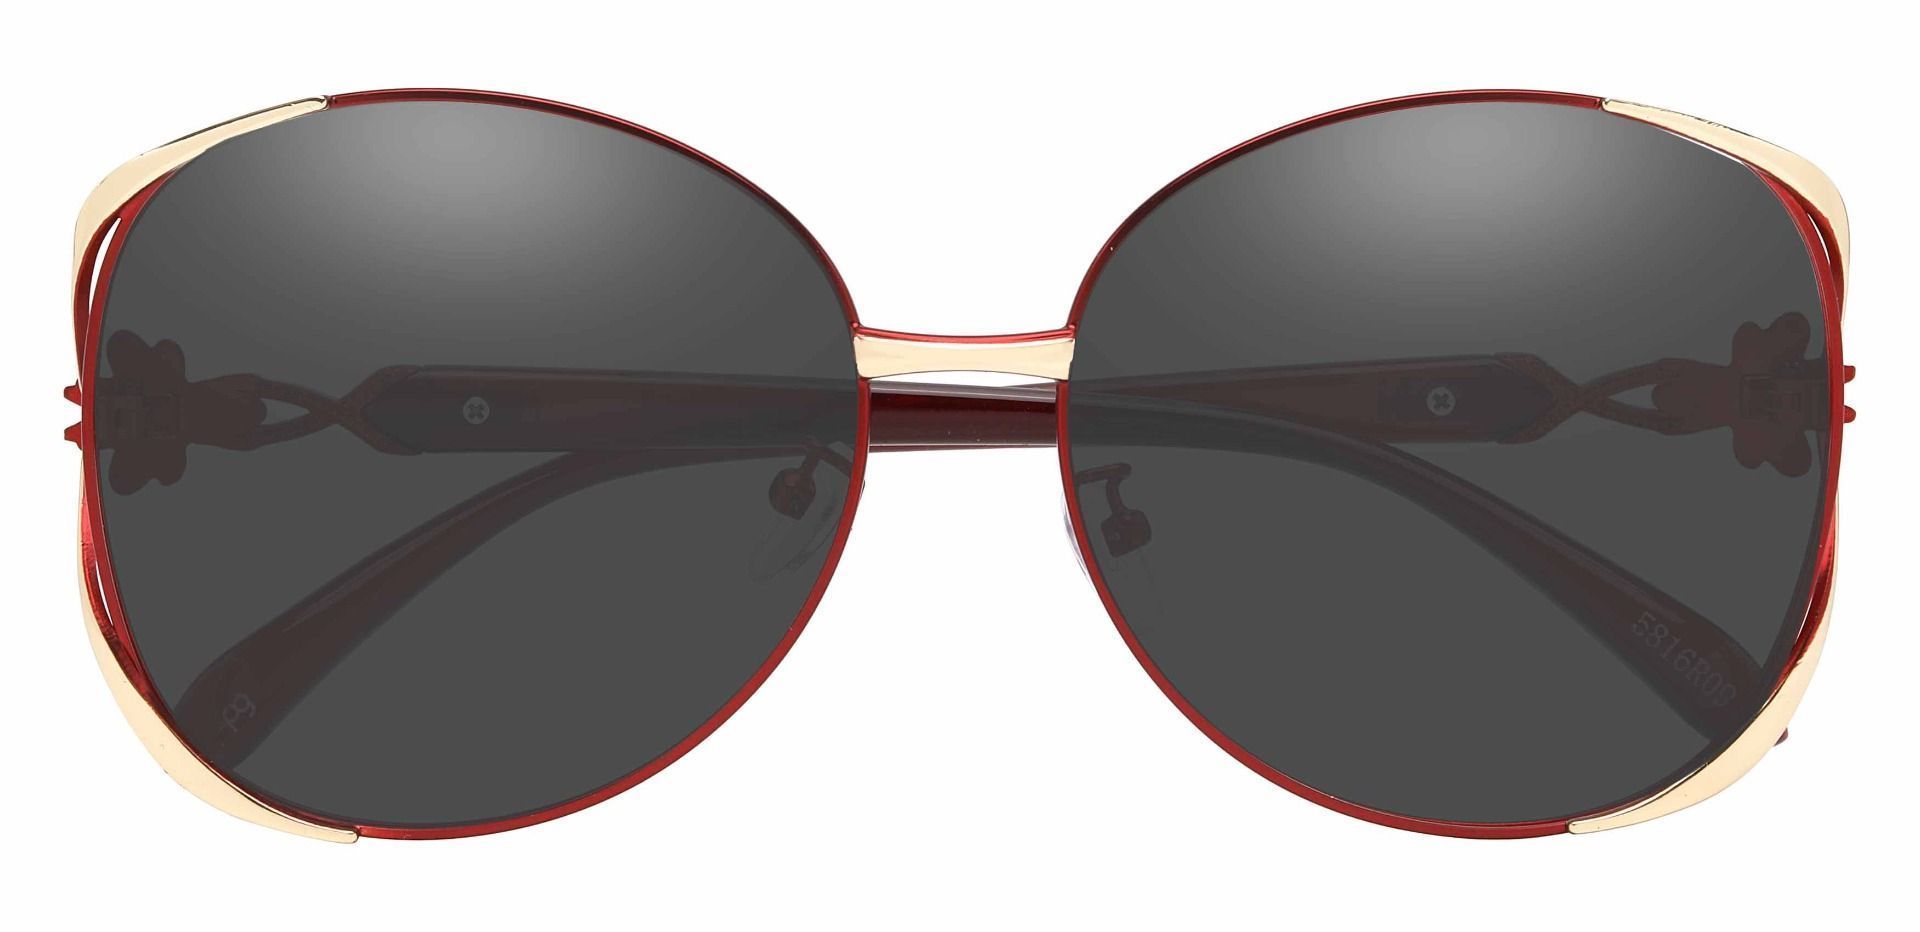 Nina Round Single Vision Sunglasses - Red Frame With Gray Lenses